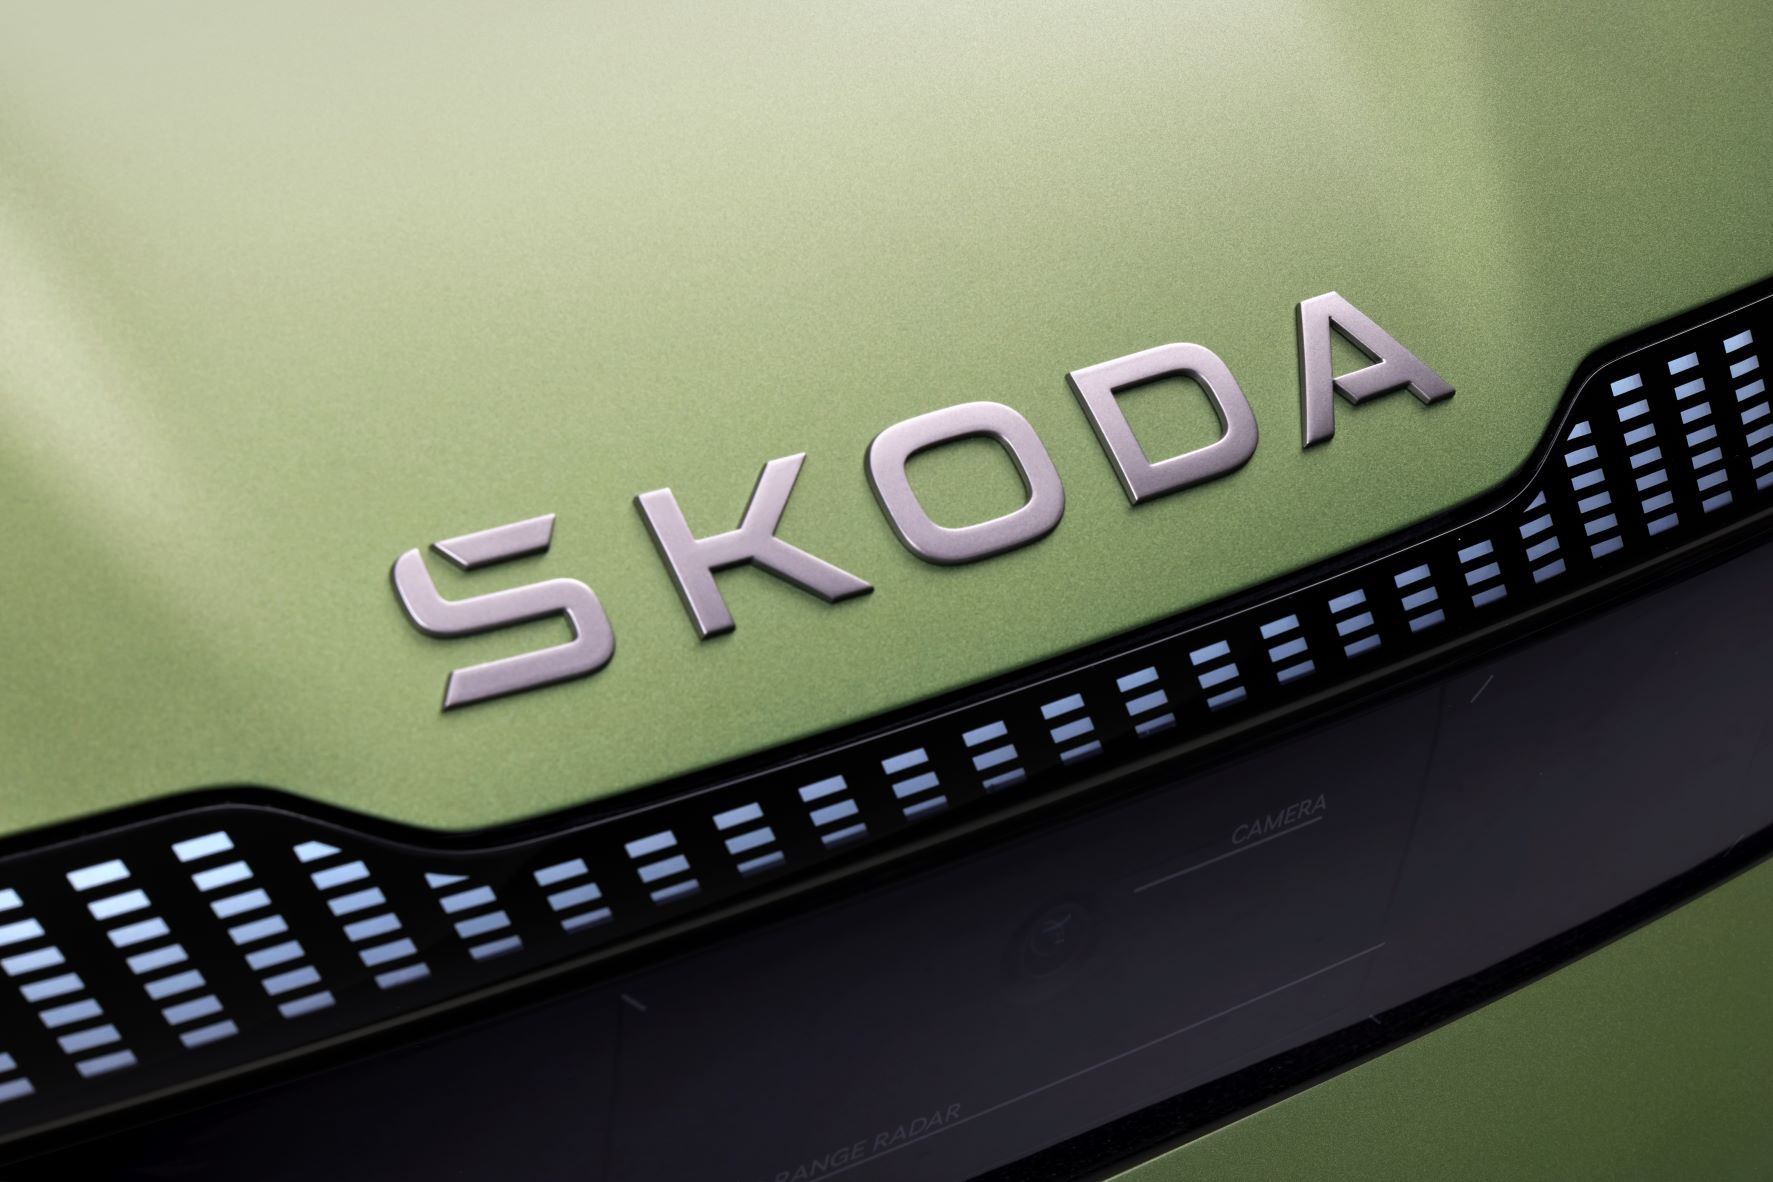 Skoda's new brand and colours on display